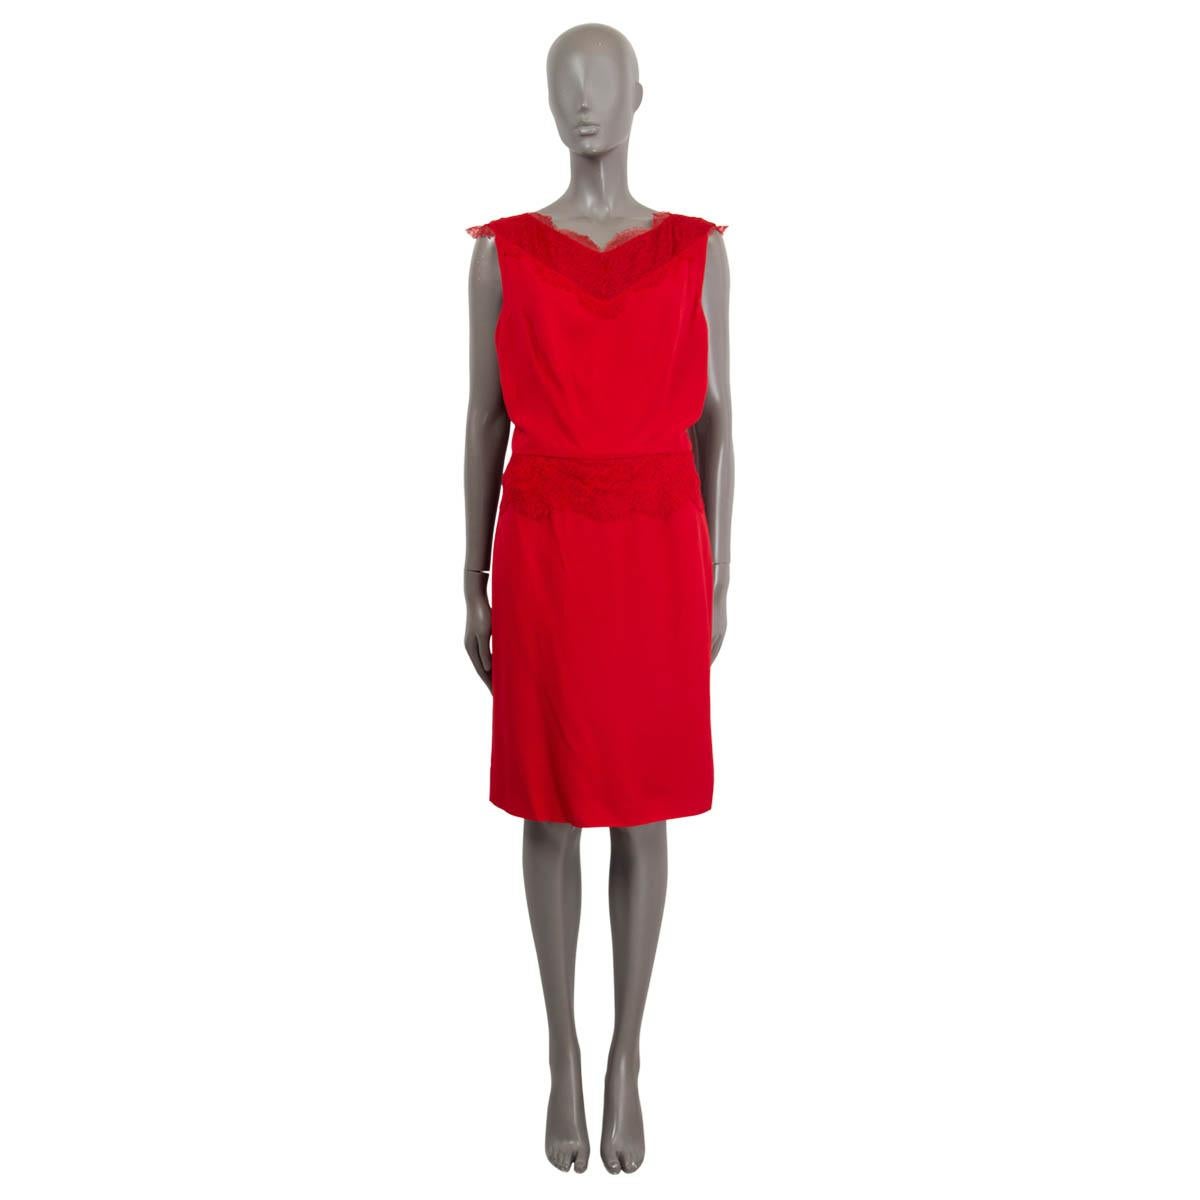 100% authentic Christian Dior sleeveless cocktail dress in red acetate (57%) and viscose (43%) with lace details around the waist, chest and shoulders. Open back with twisted strap detail. Opens with a zipper on the back and is lined in silk (100%).